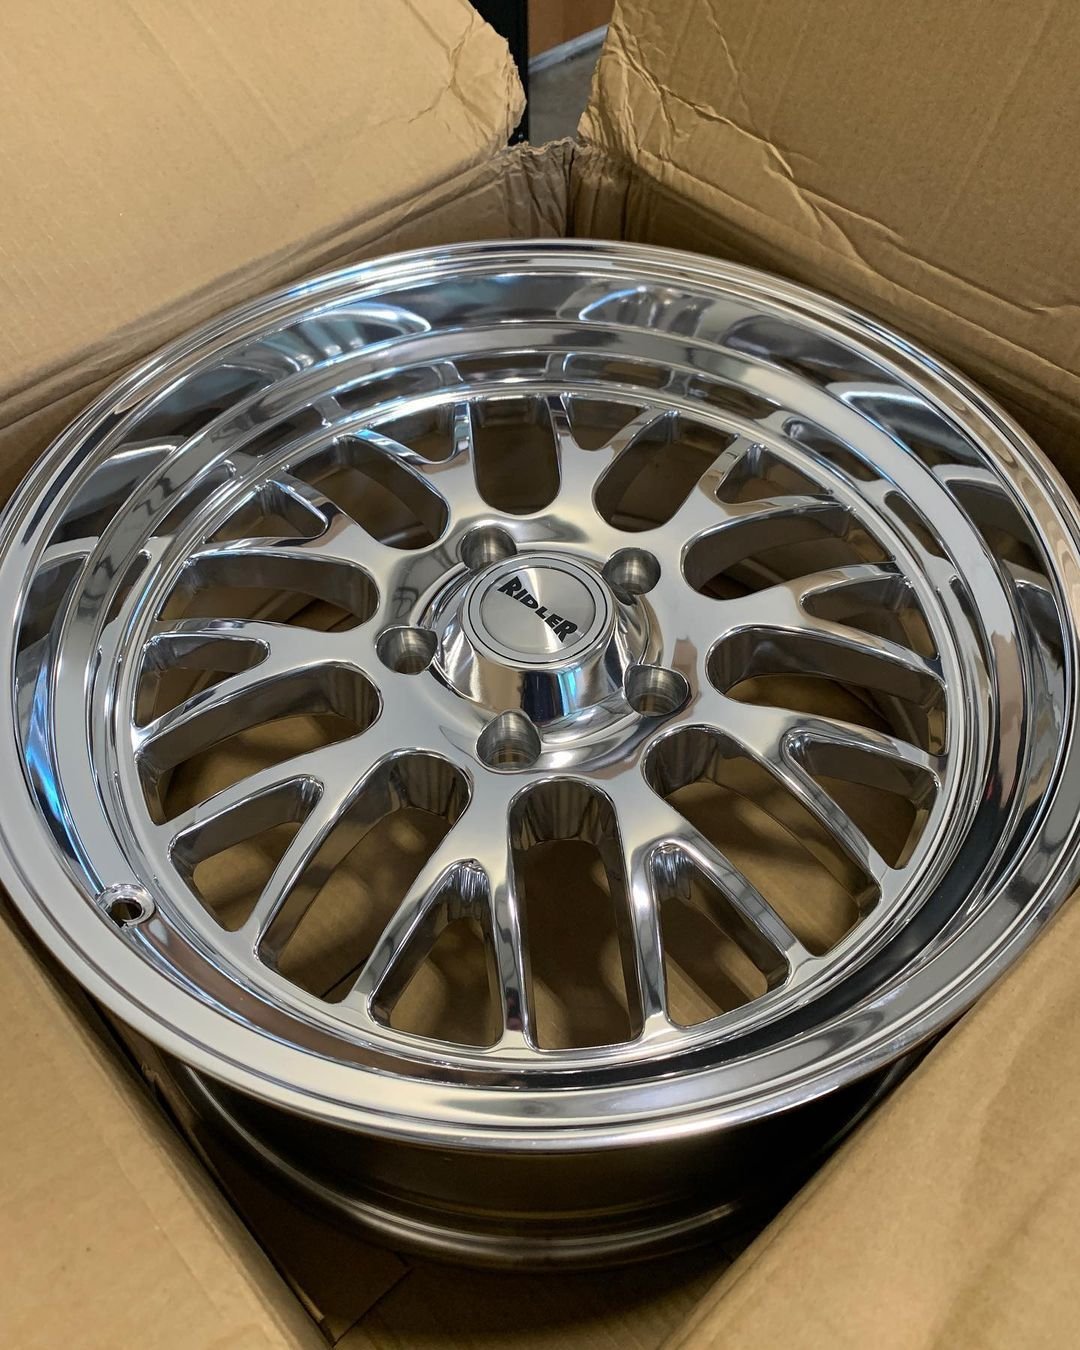 Check out the Ridler Wheels 607 in a vibrant polished finish! These wheels are sure to make your ride stand out from the crowd with their eye-catching shine and sleek design. 🔥

#ridler #ridlerwheels #classiccars #vintagecars #wheels #wheelupgrade #